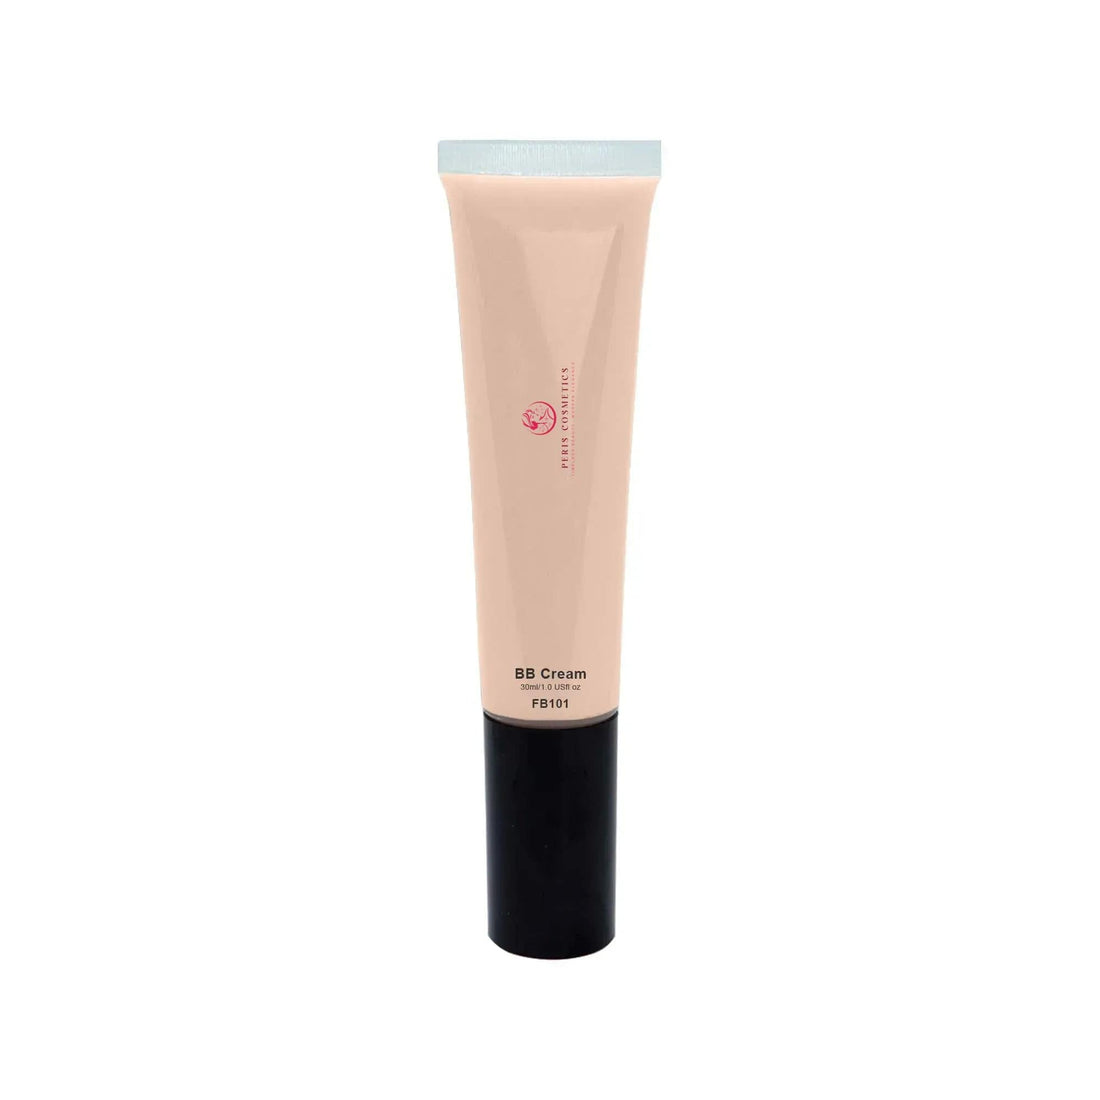 Peris Cosmetics Pearly BB Cream with SPF: Hydration, Line Smoothing, and Sun Protection for Radiant Skin Kylie Cosmetics Amazon